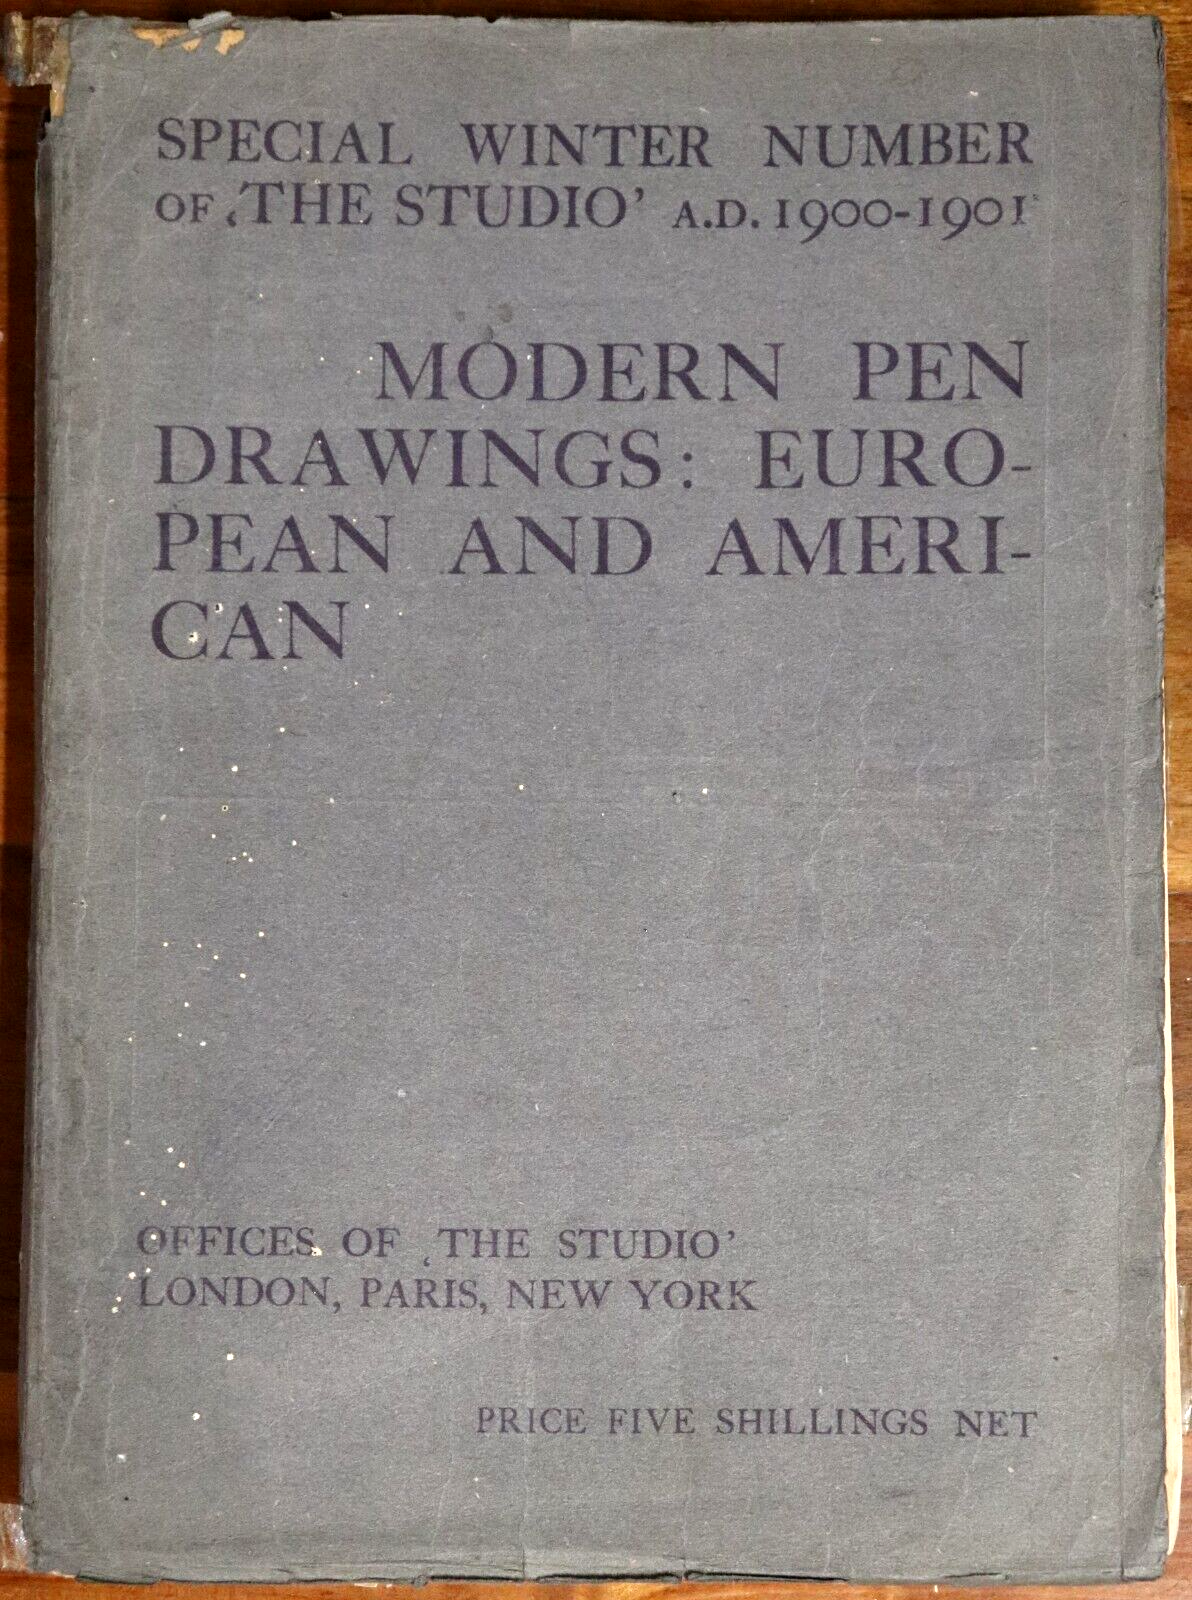 1901 The Studio: Modern Pen Drawings Antiquarian Art Magazine by Charles Holme